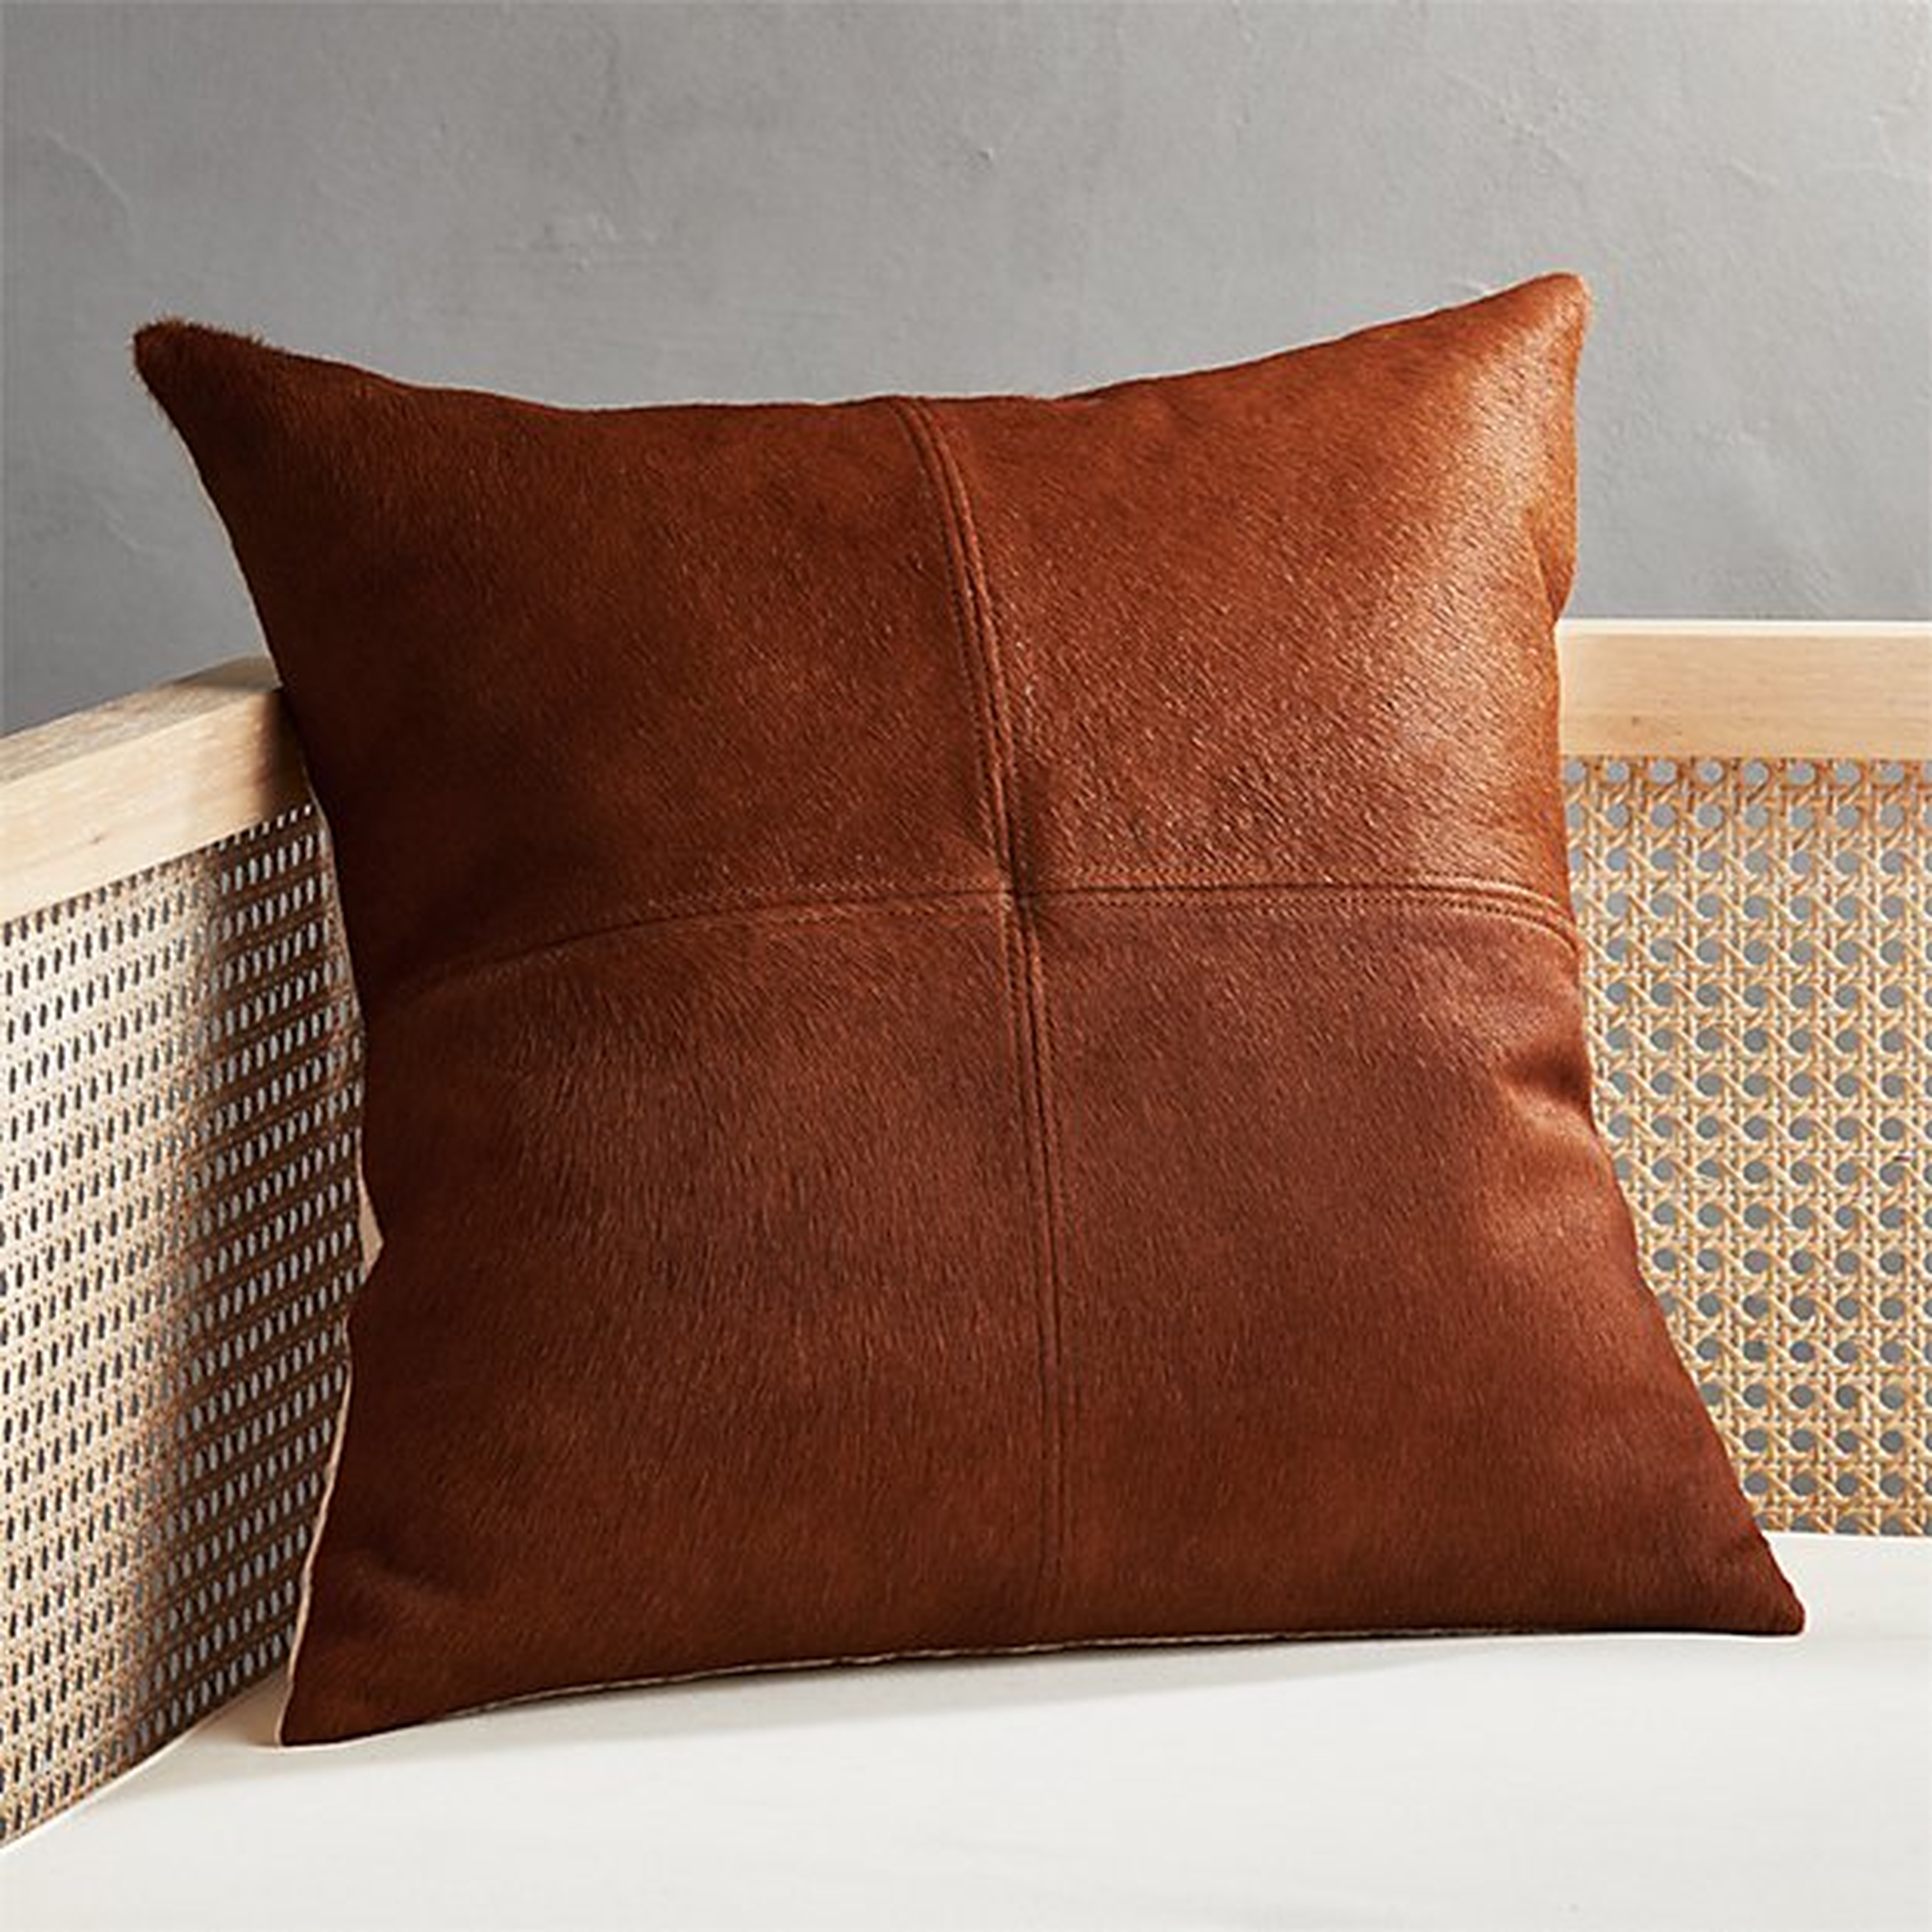 18" LIGHT BROWN COWHIDE PILLOW WITH FEATHER-DOWN INSERT - CB2